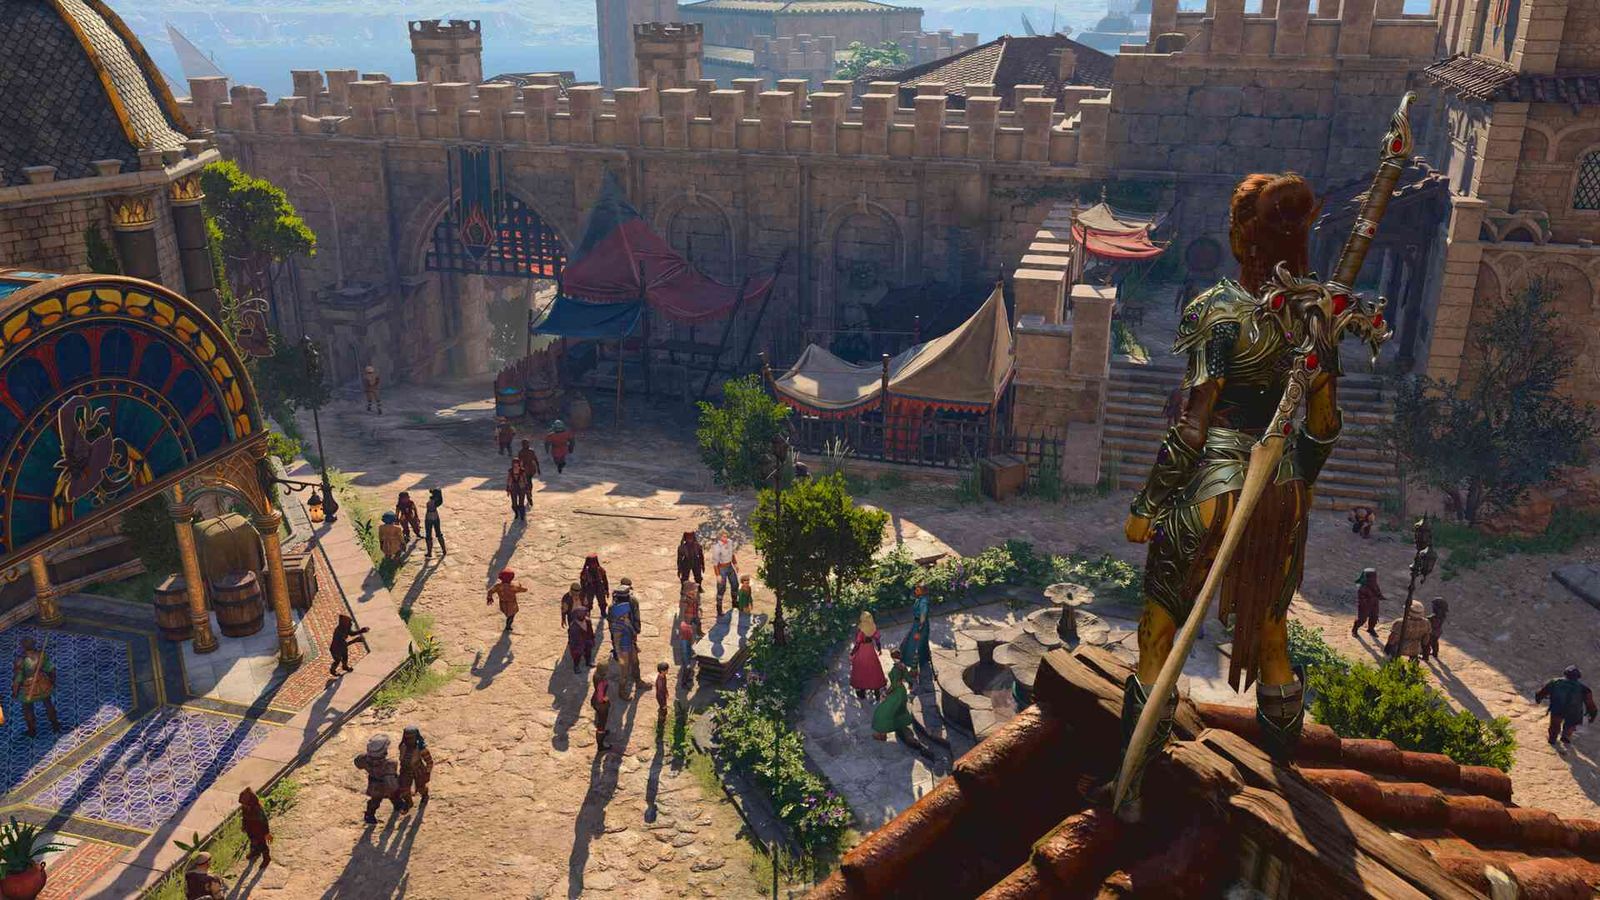 The player character looking across a town courtyard in Baldur's Gate 3.